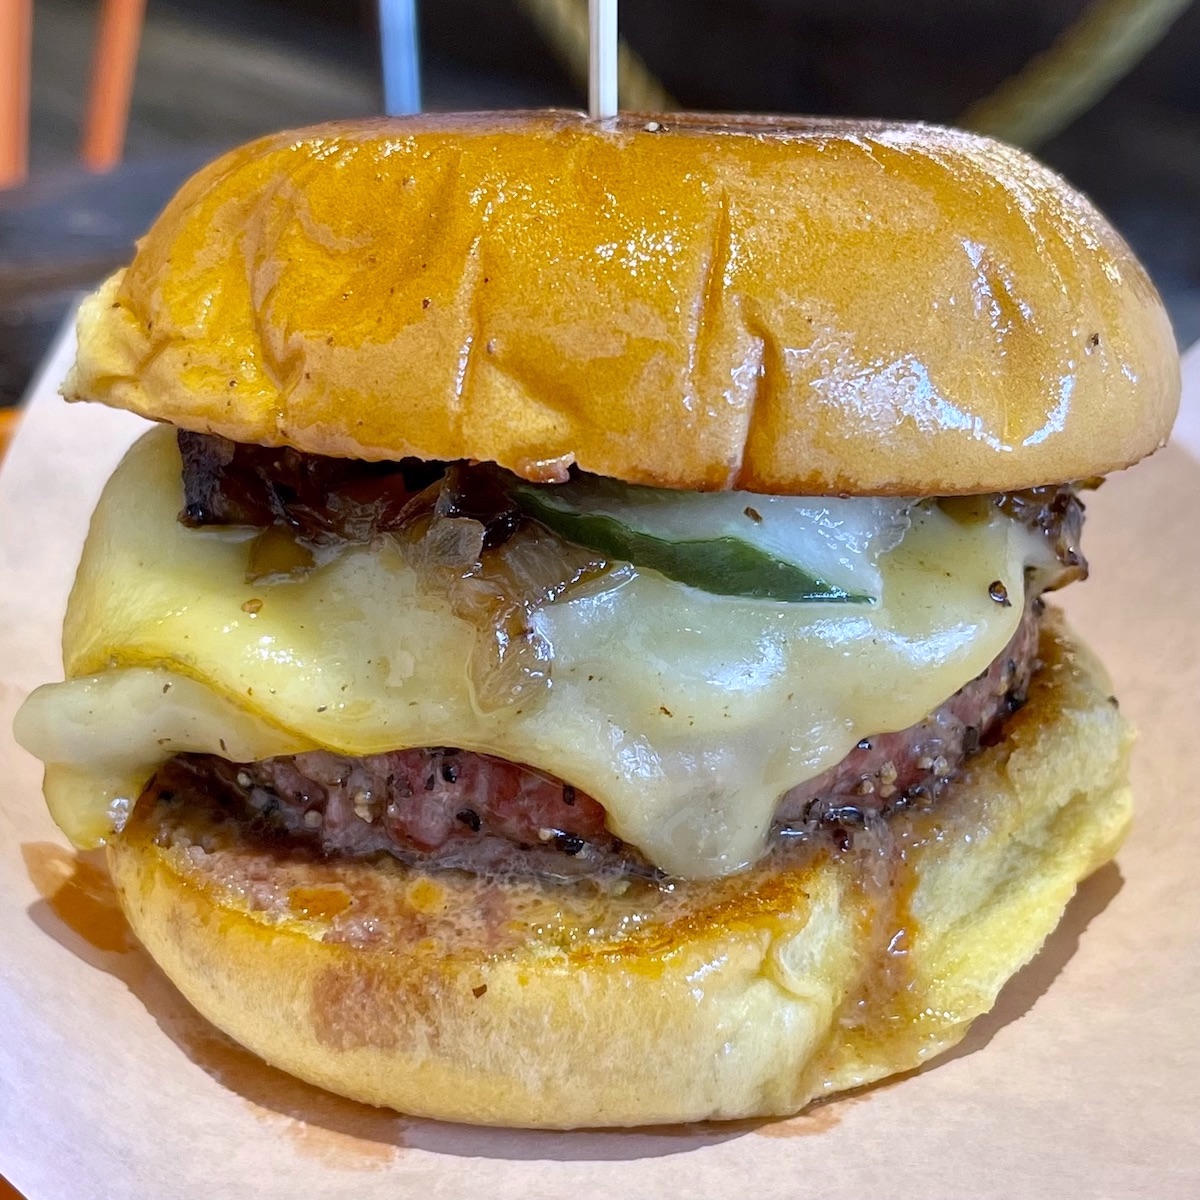 Smoked Cheeseburger from Smoke and Dough in West Kendall, Florida